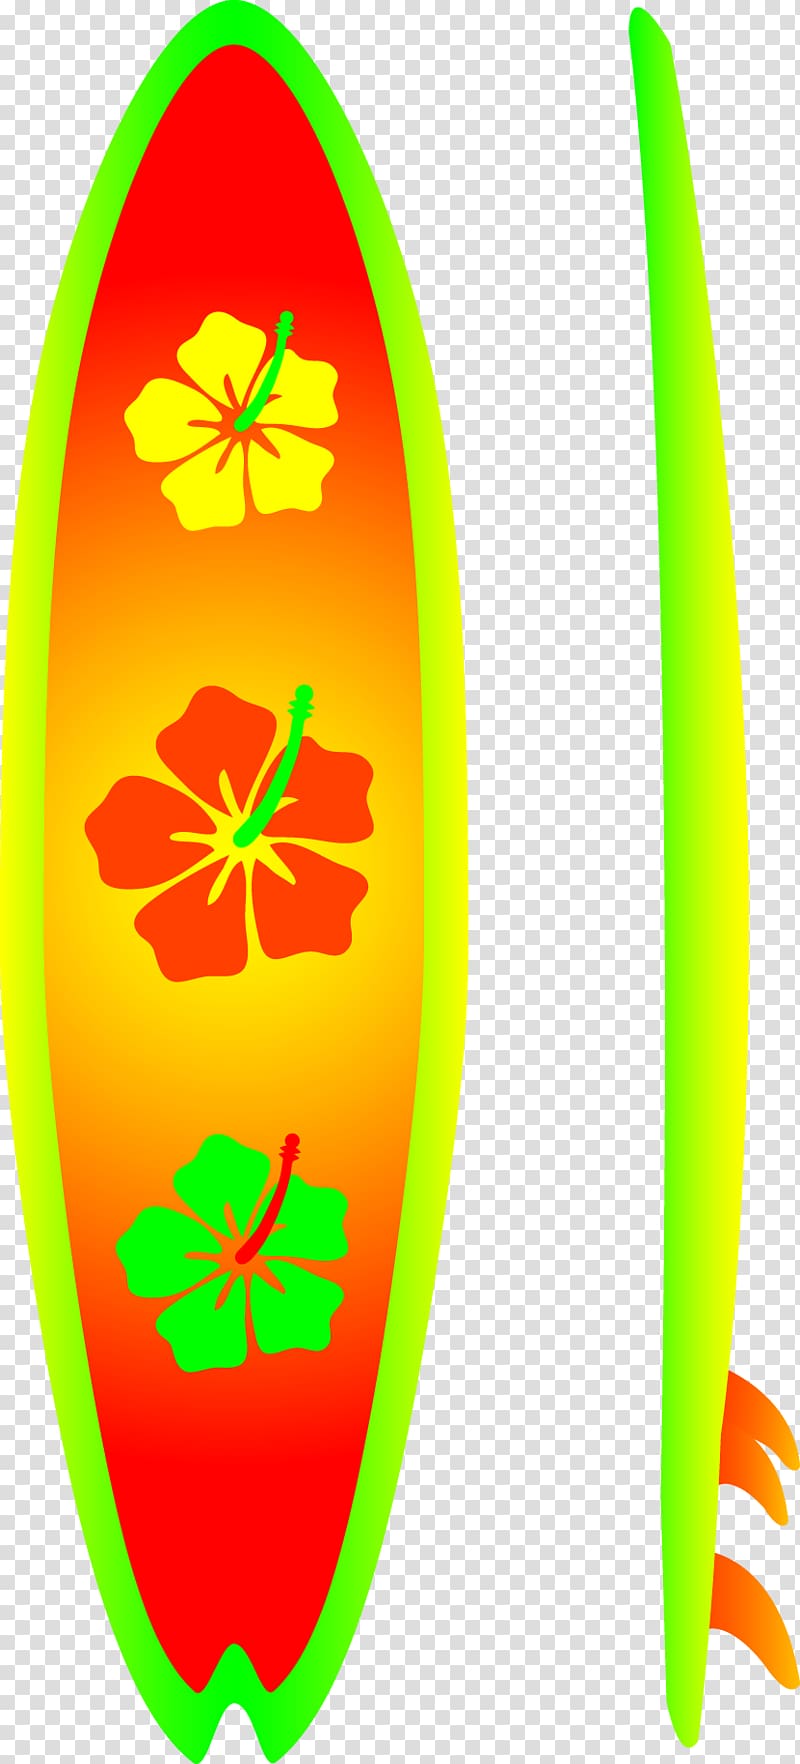 Surfboard Surfing , surfing transparent background PNG clipart